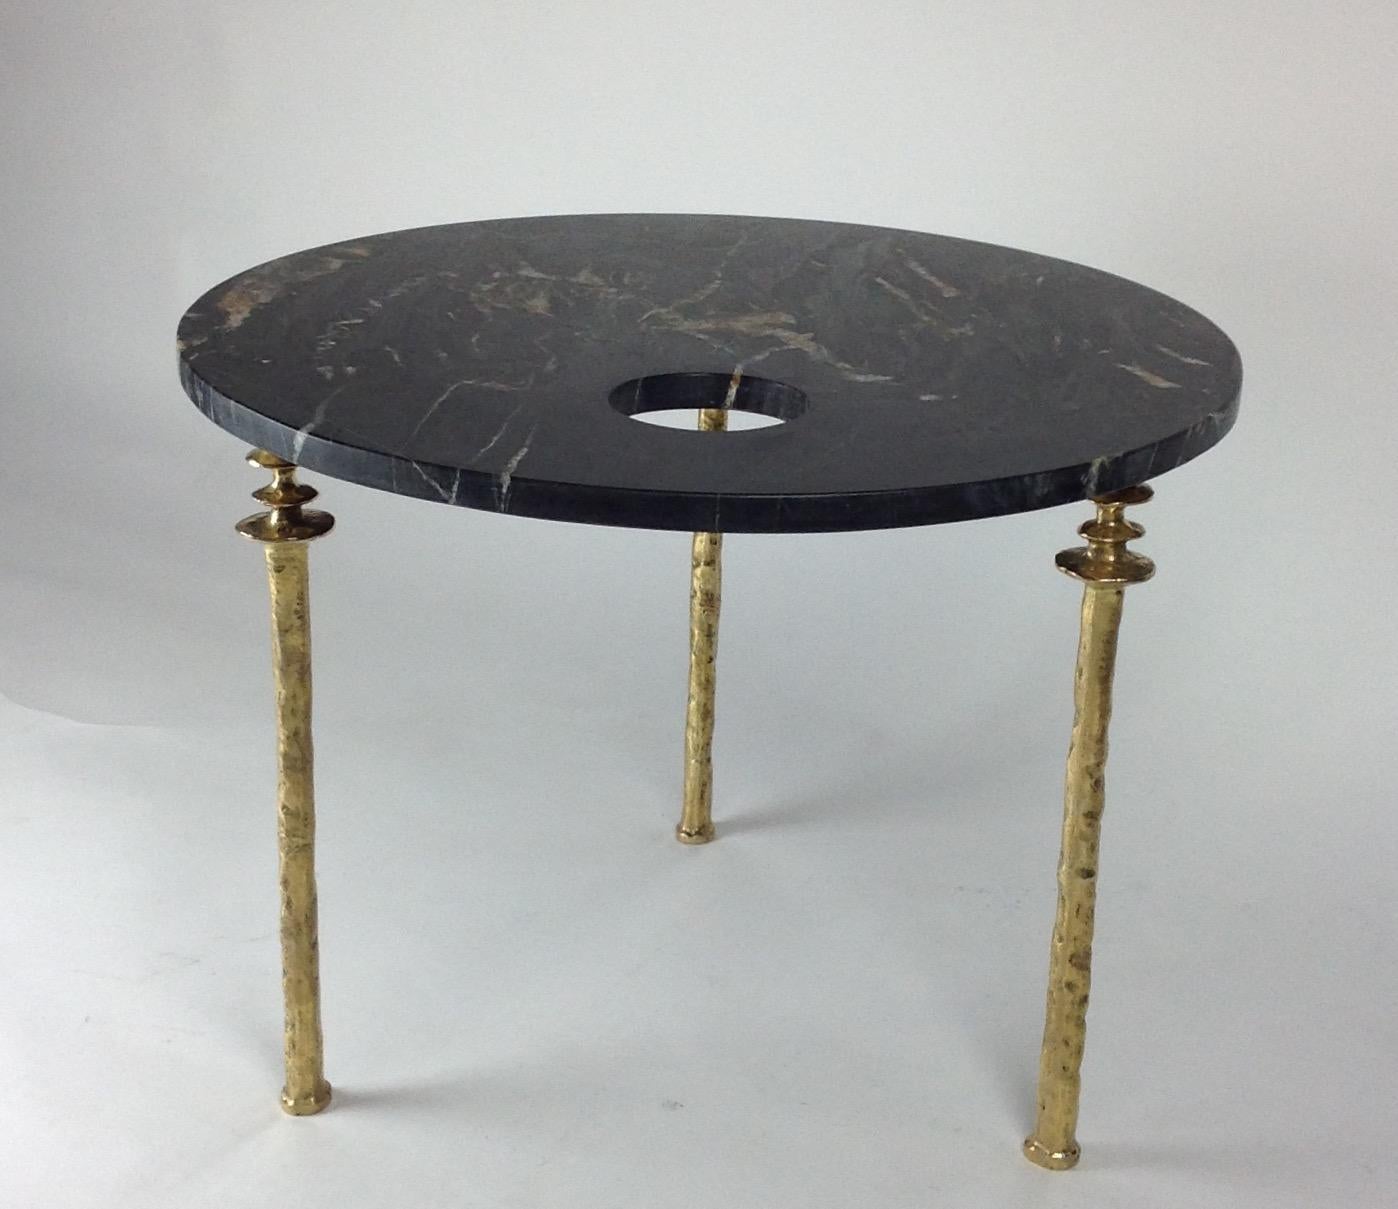 One marble-topped small scaled side tables. The round top has a single hole drilled off center in the black and gold marble top. The legs are cast silicon brass and have a unique organic texture.  This item is in our NYC showroom.  Custom models are